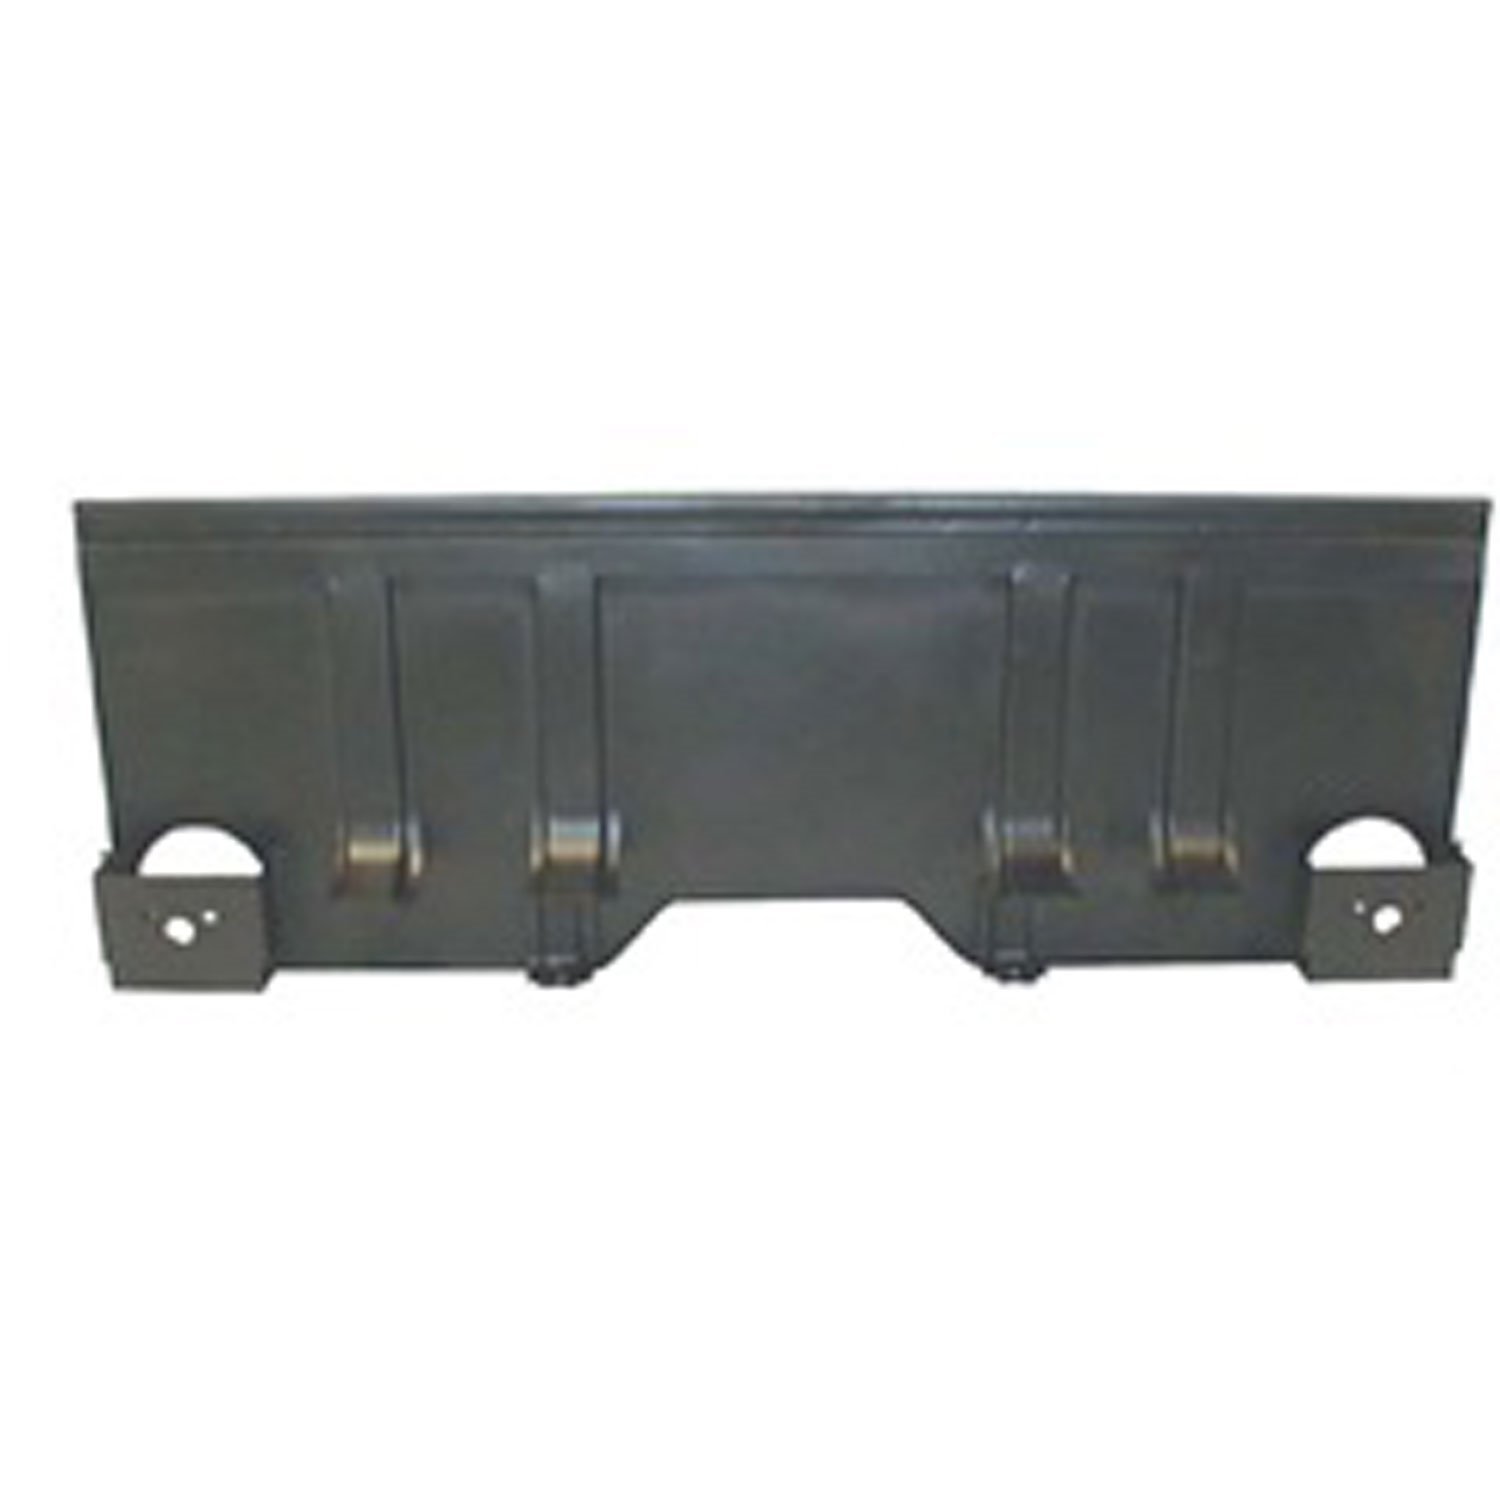 This reproduction rear tailgate panel from Omix-ADA fits 52-57 Willys M38-A1.